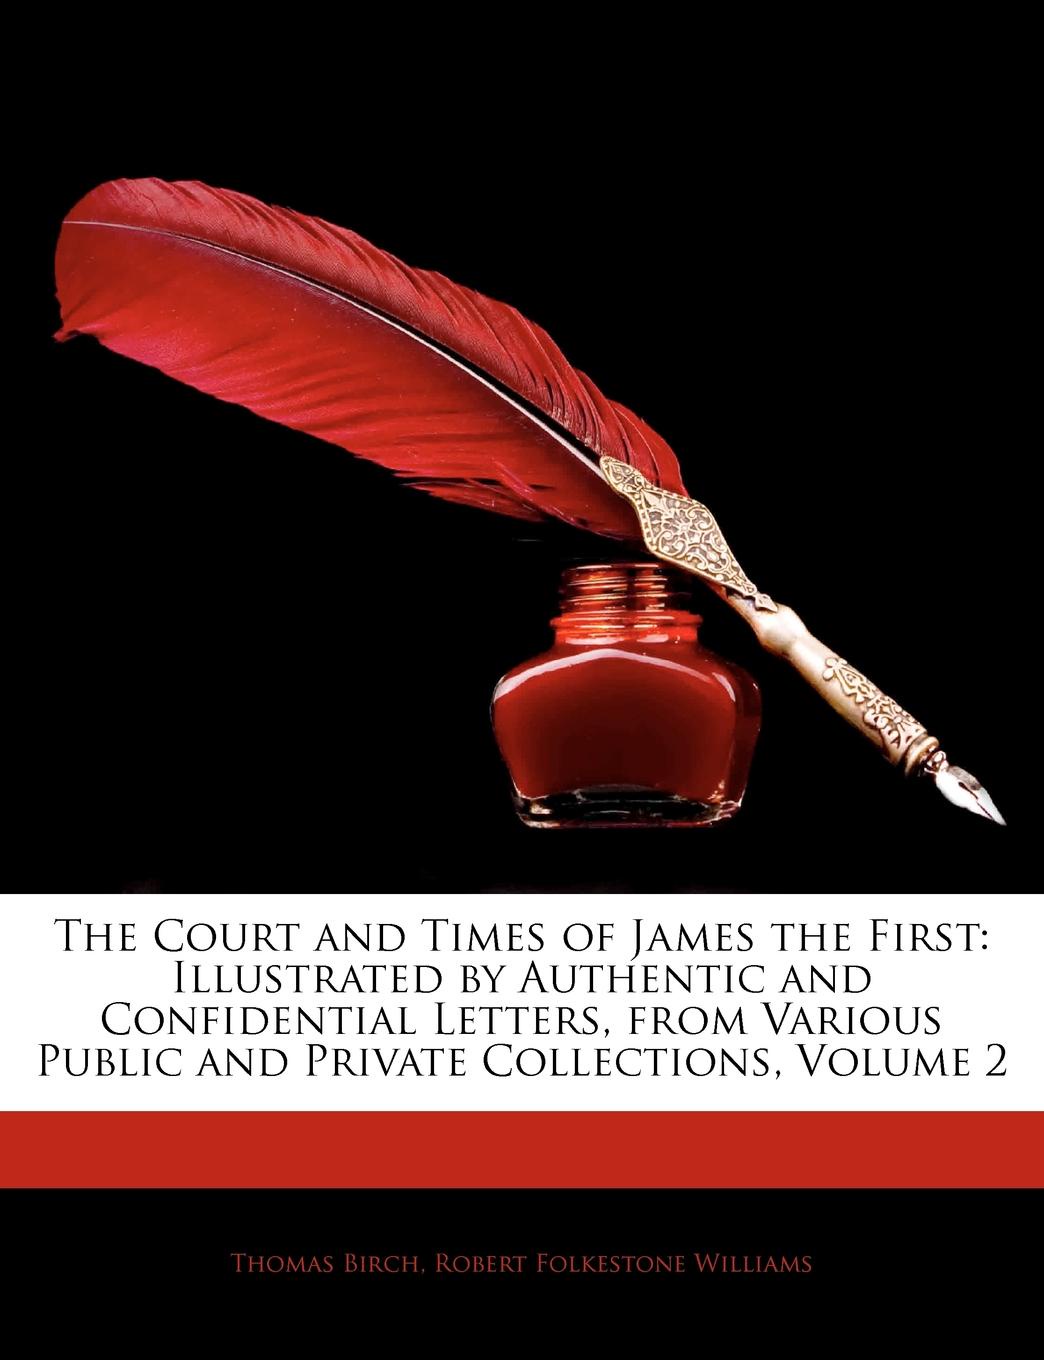 The Court and Times of James the First. Illustrated by Authentic and Confidential Letters, from Various Public and Private Collections, Volume 2